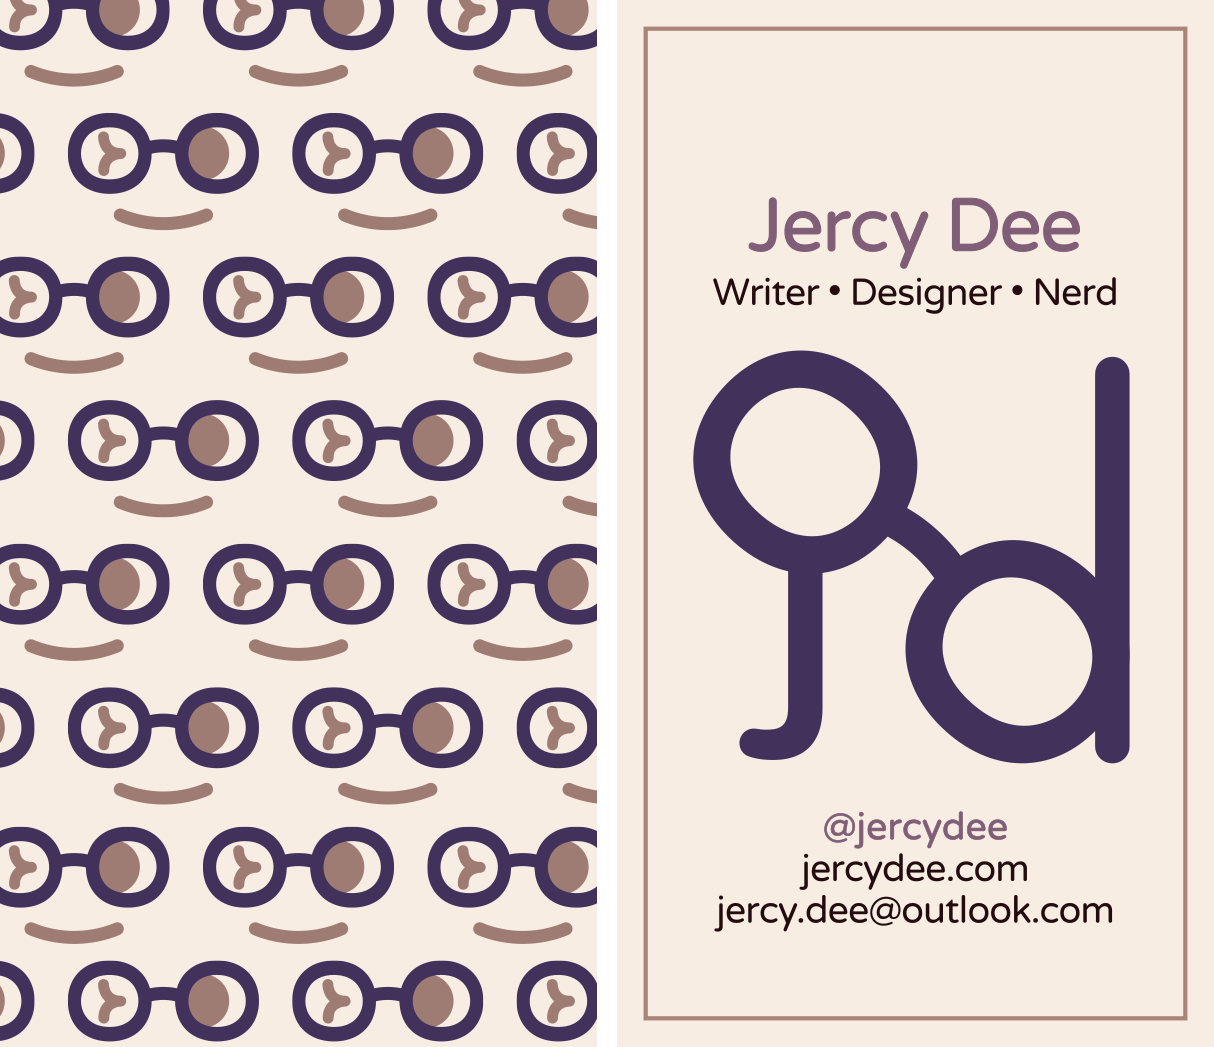 A digital collage of my business card--the patterned front side on the left, and the information back side on the right.